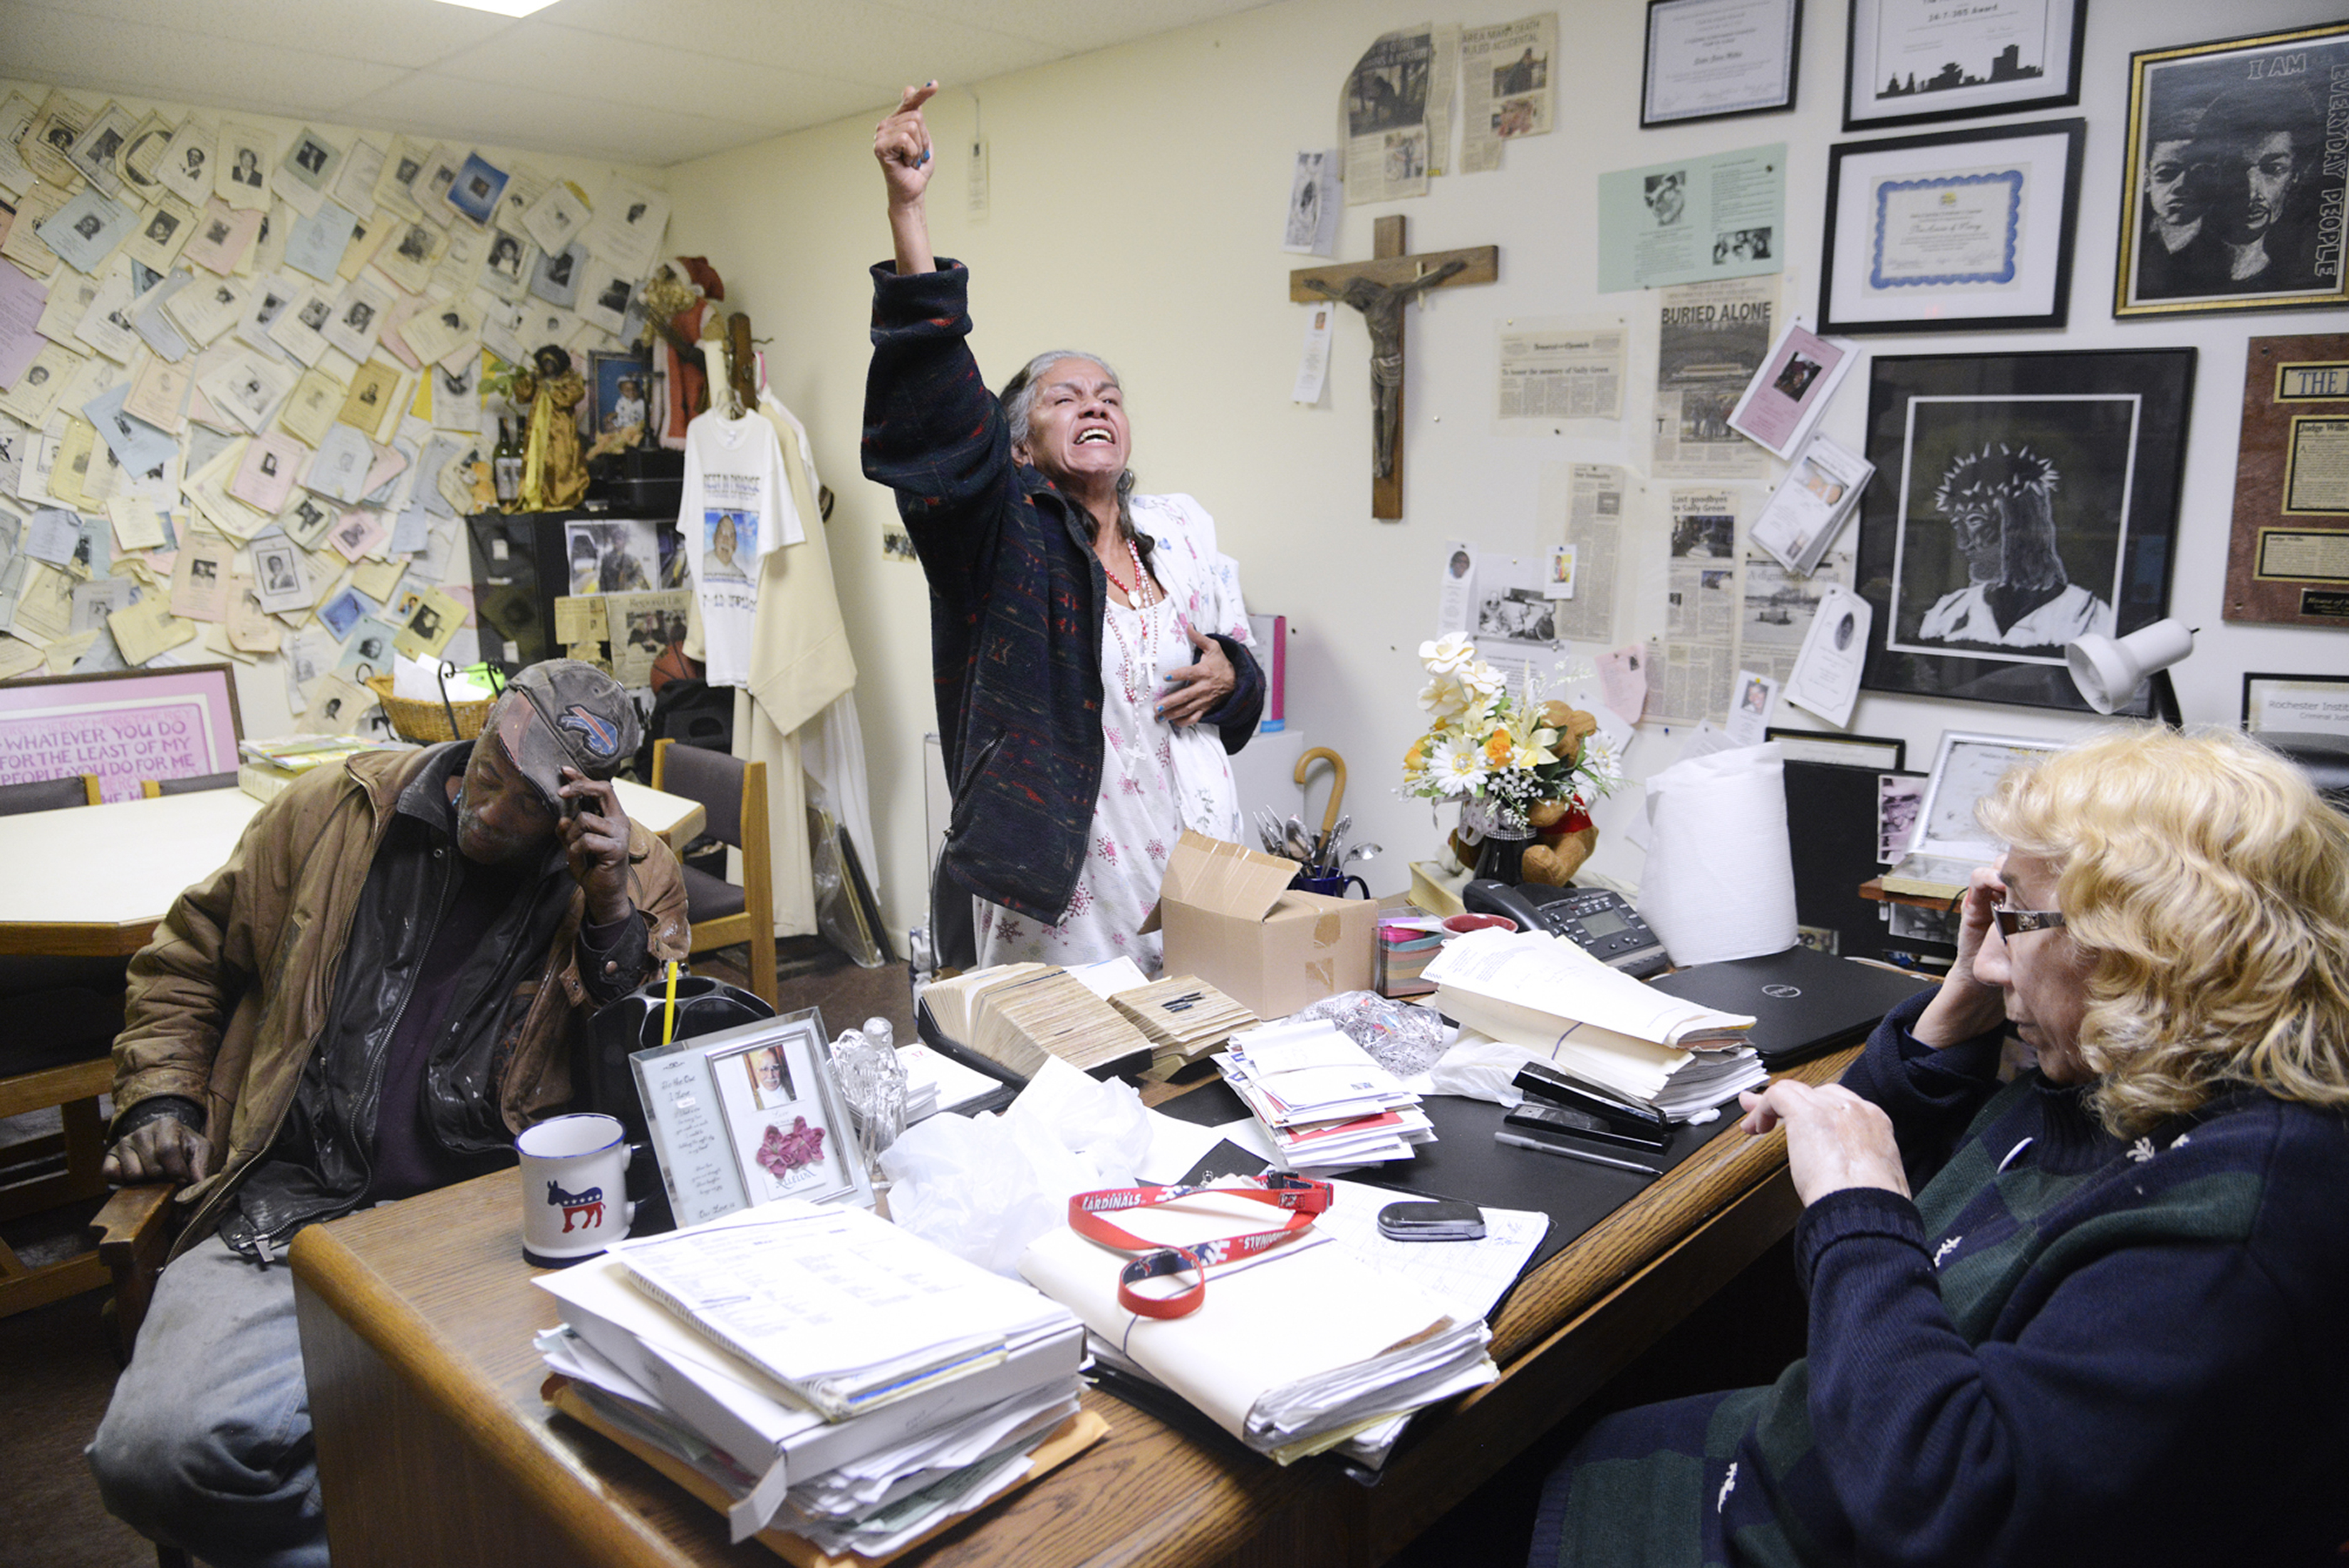 Sister Grace Miller, right, calls residents "Handyman", left, and Elena, center, into her office to resolve a dispute on Tuesday, December 17, 2013. Handyman was intoxicated and referred to Elena, who has breast cancer, as a "cancerous bitch." Photo by Emily Kask